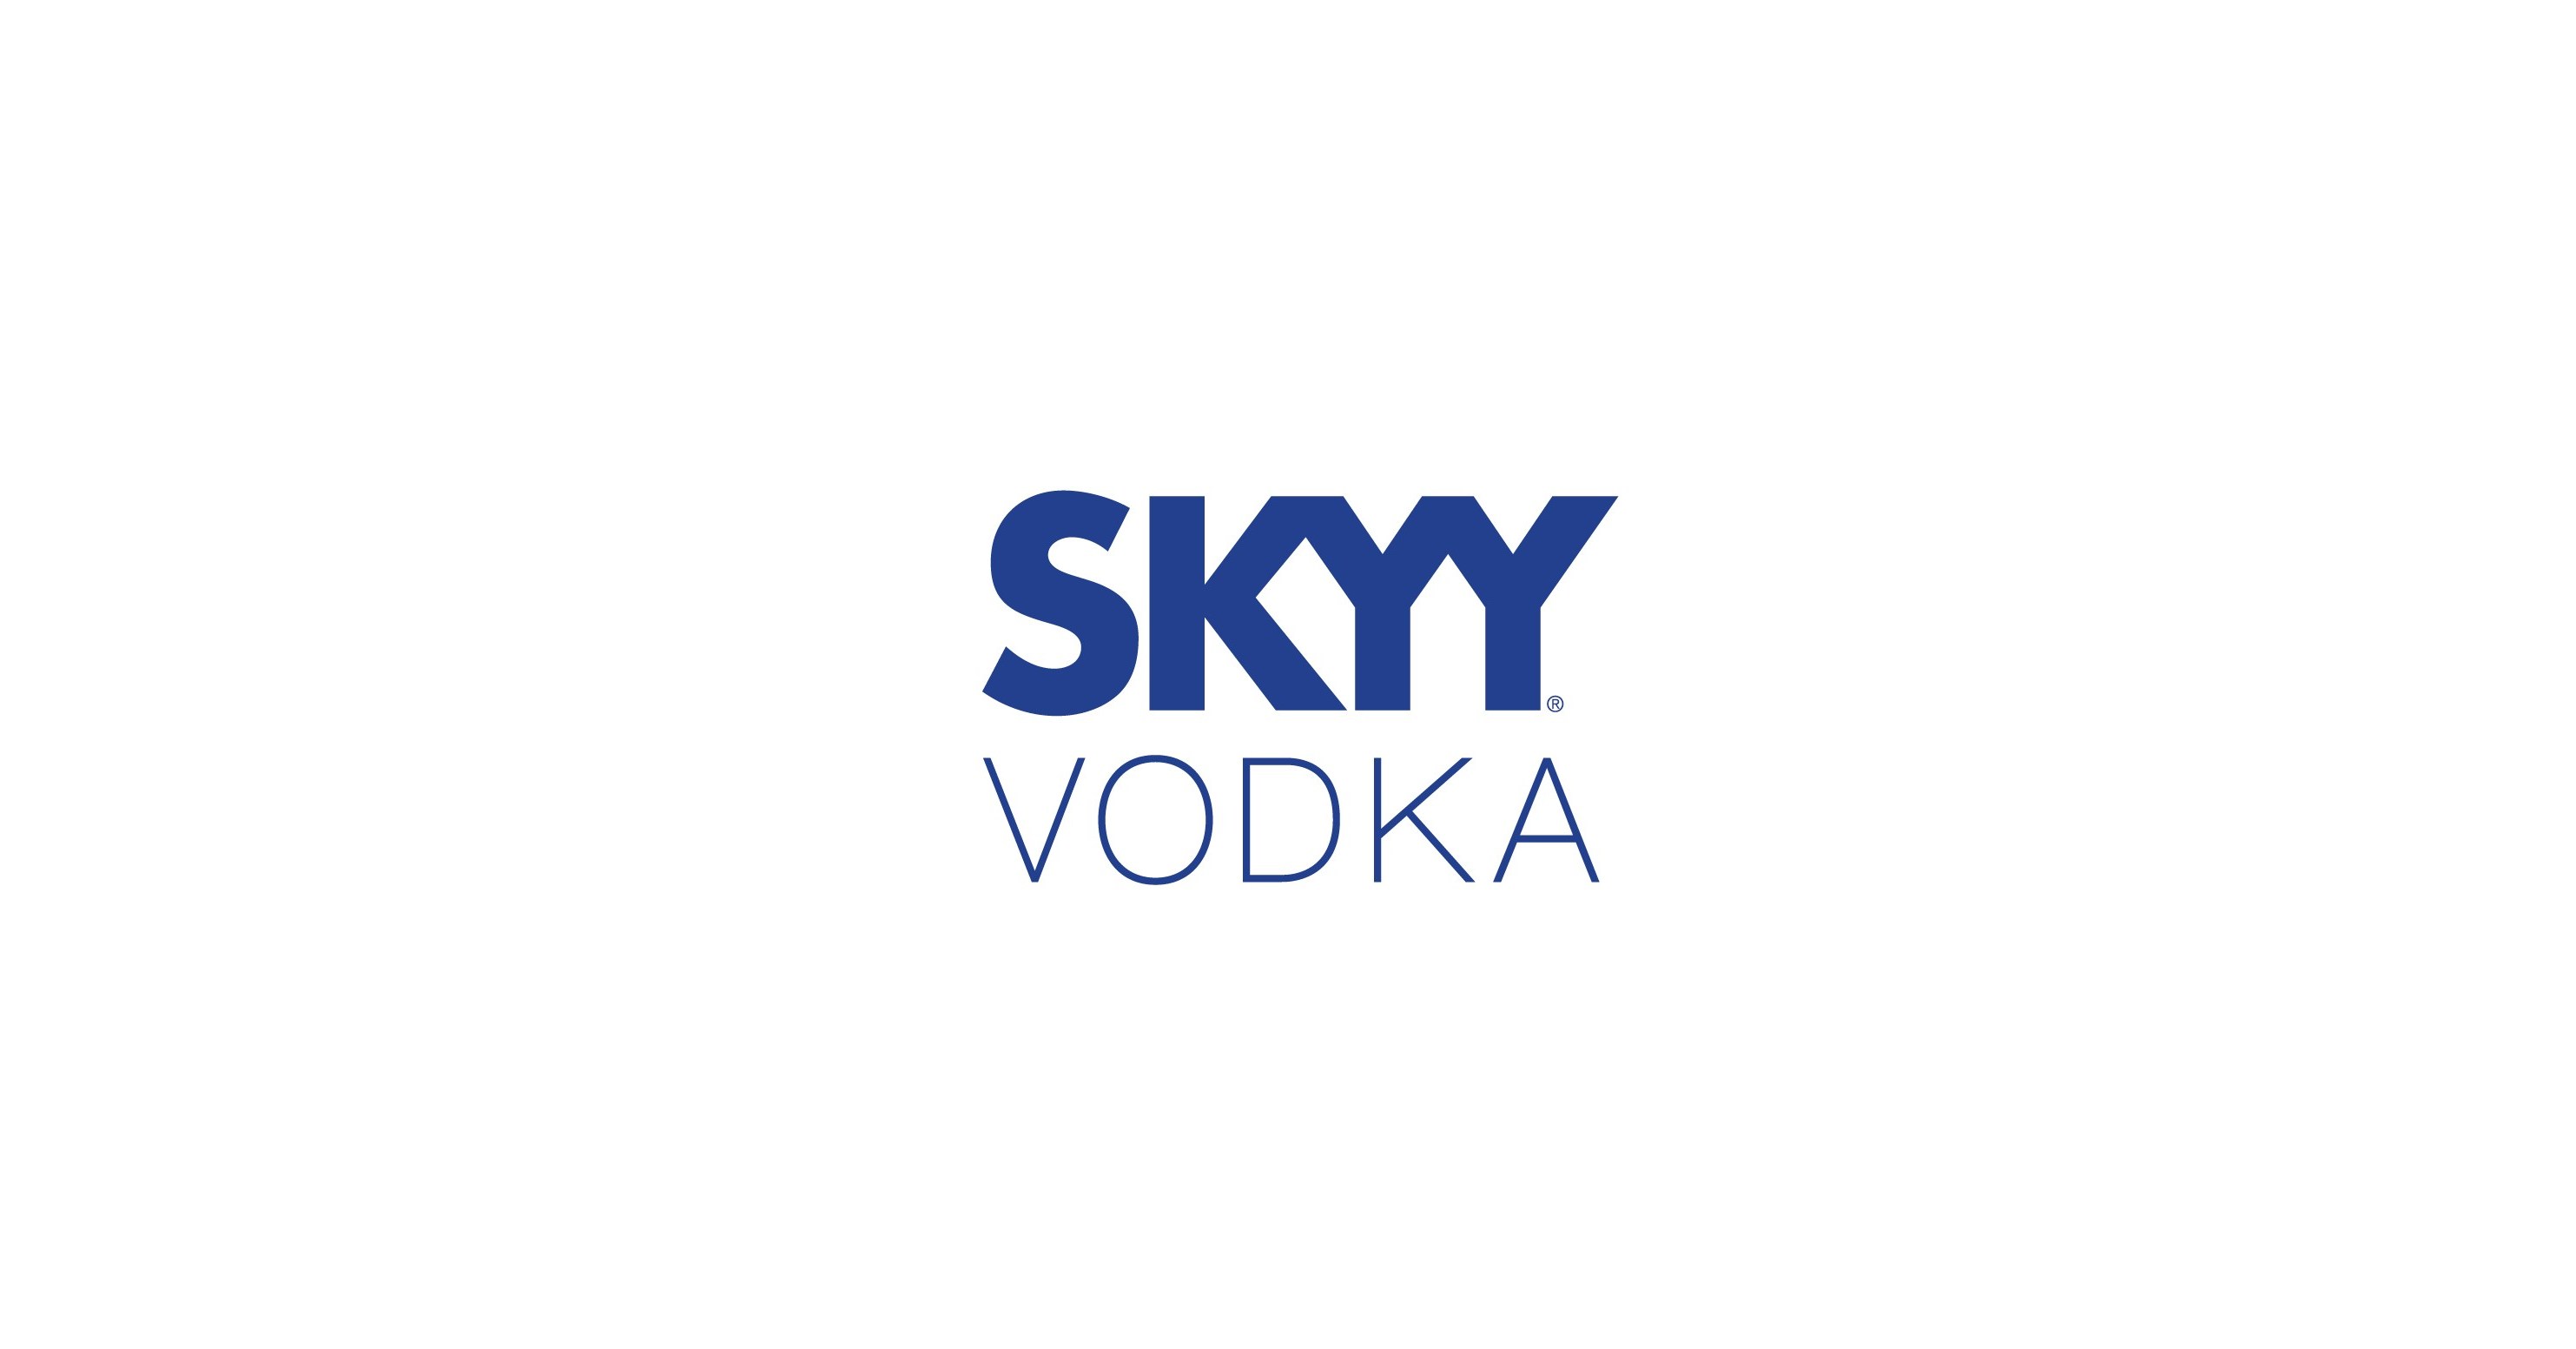 SKYY Vodka And Mindshare USA Take A Stand To Support LGBTQ Journalism